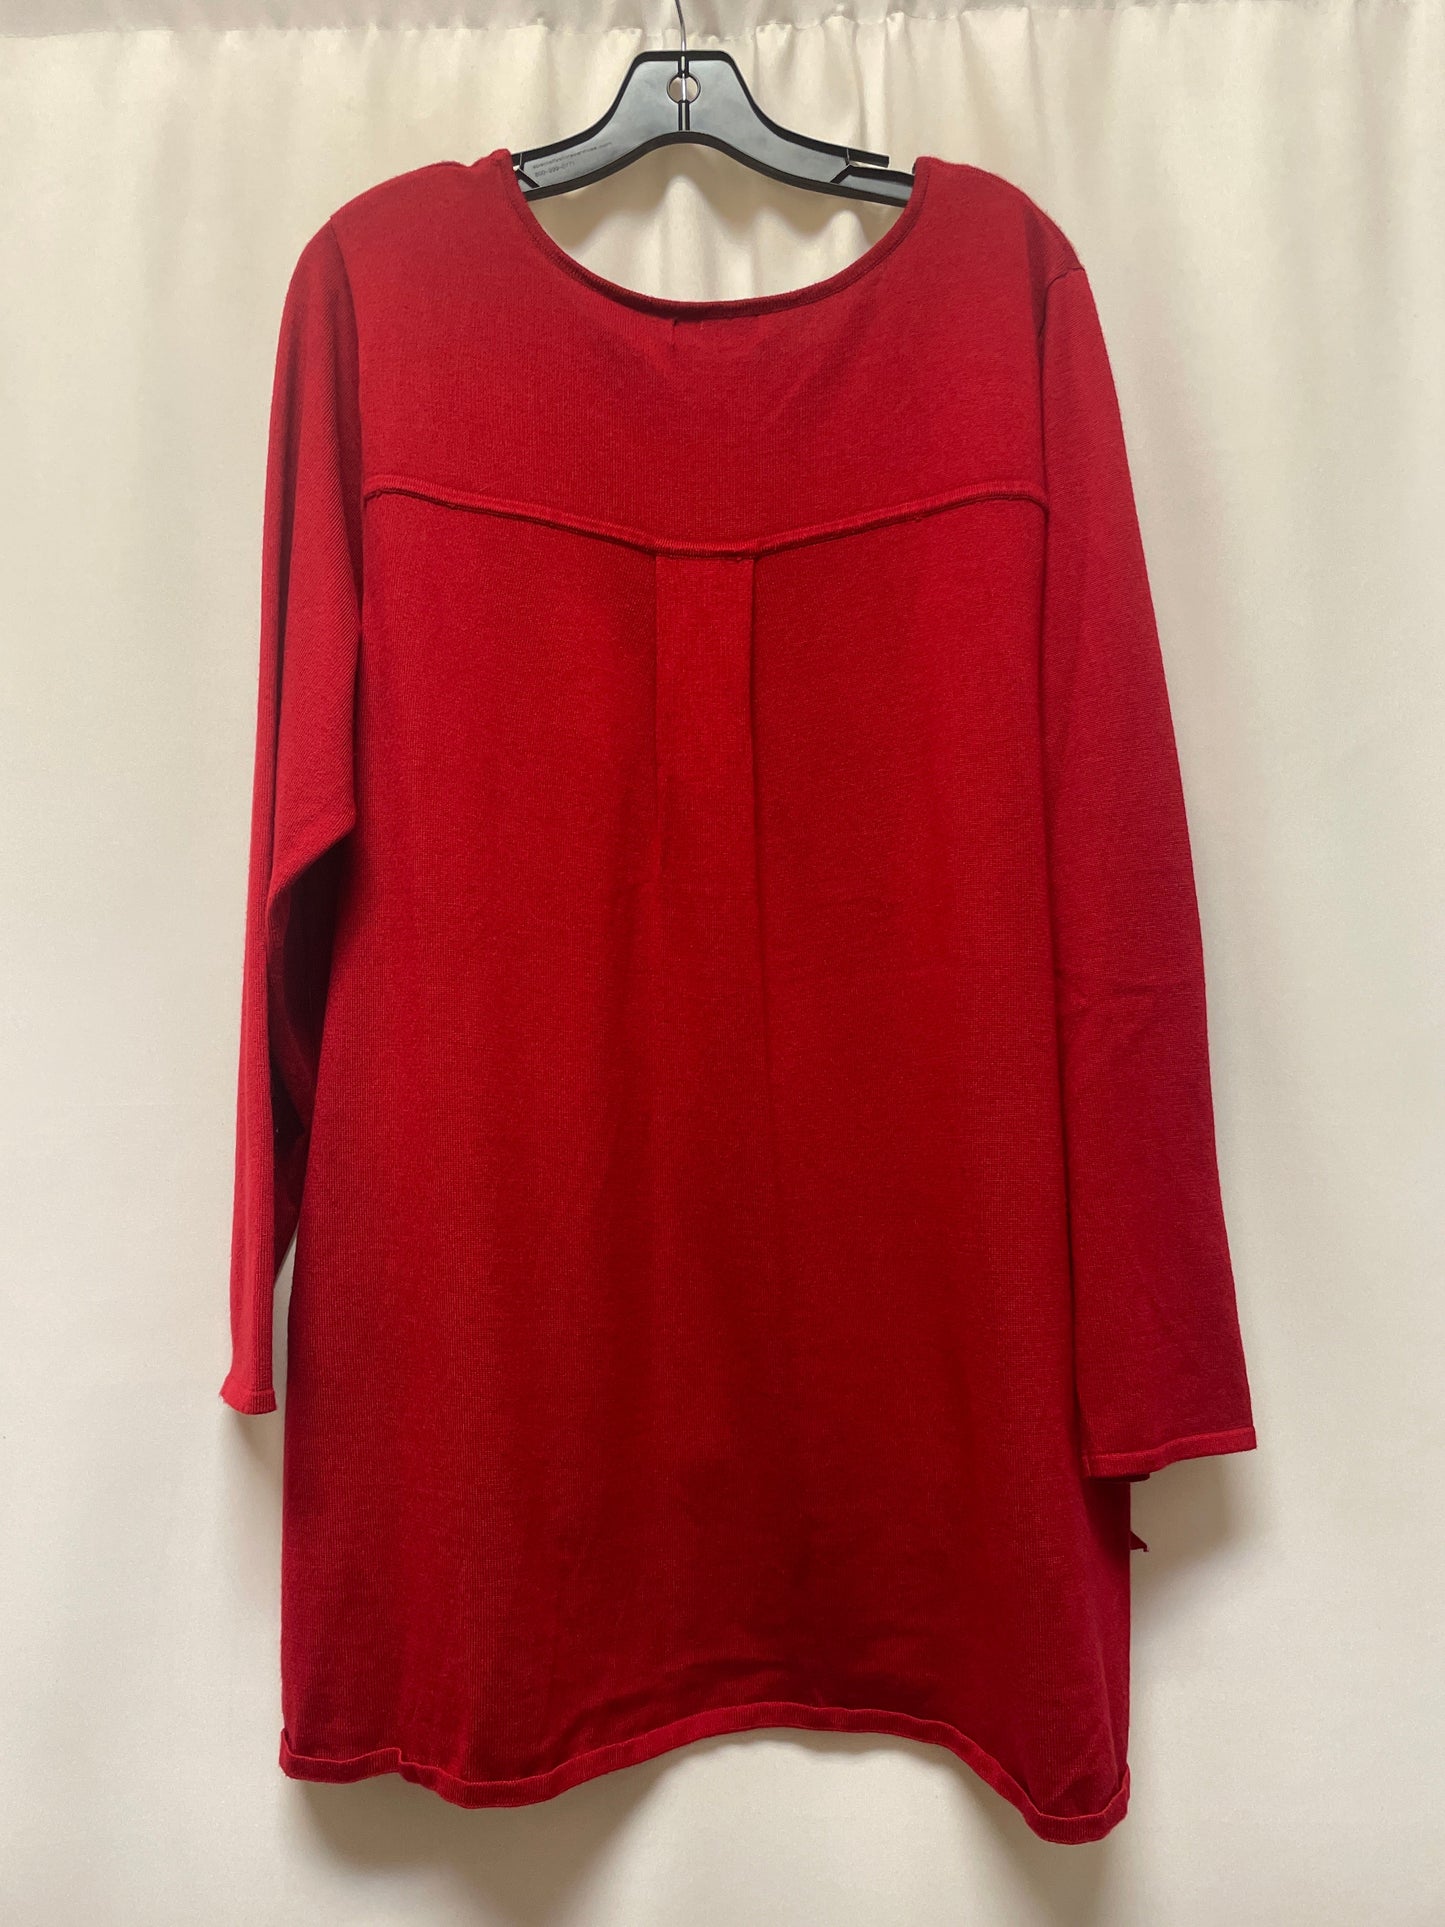 Red Top Long Sleeve Tahari By Arthur Levine, Size 2x